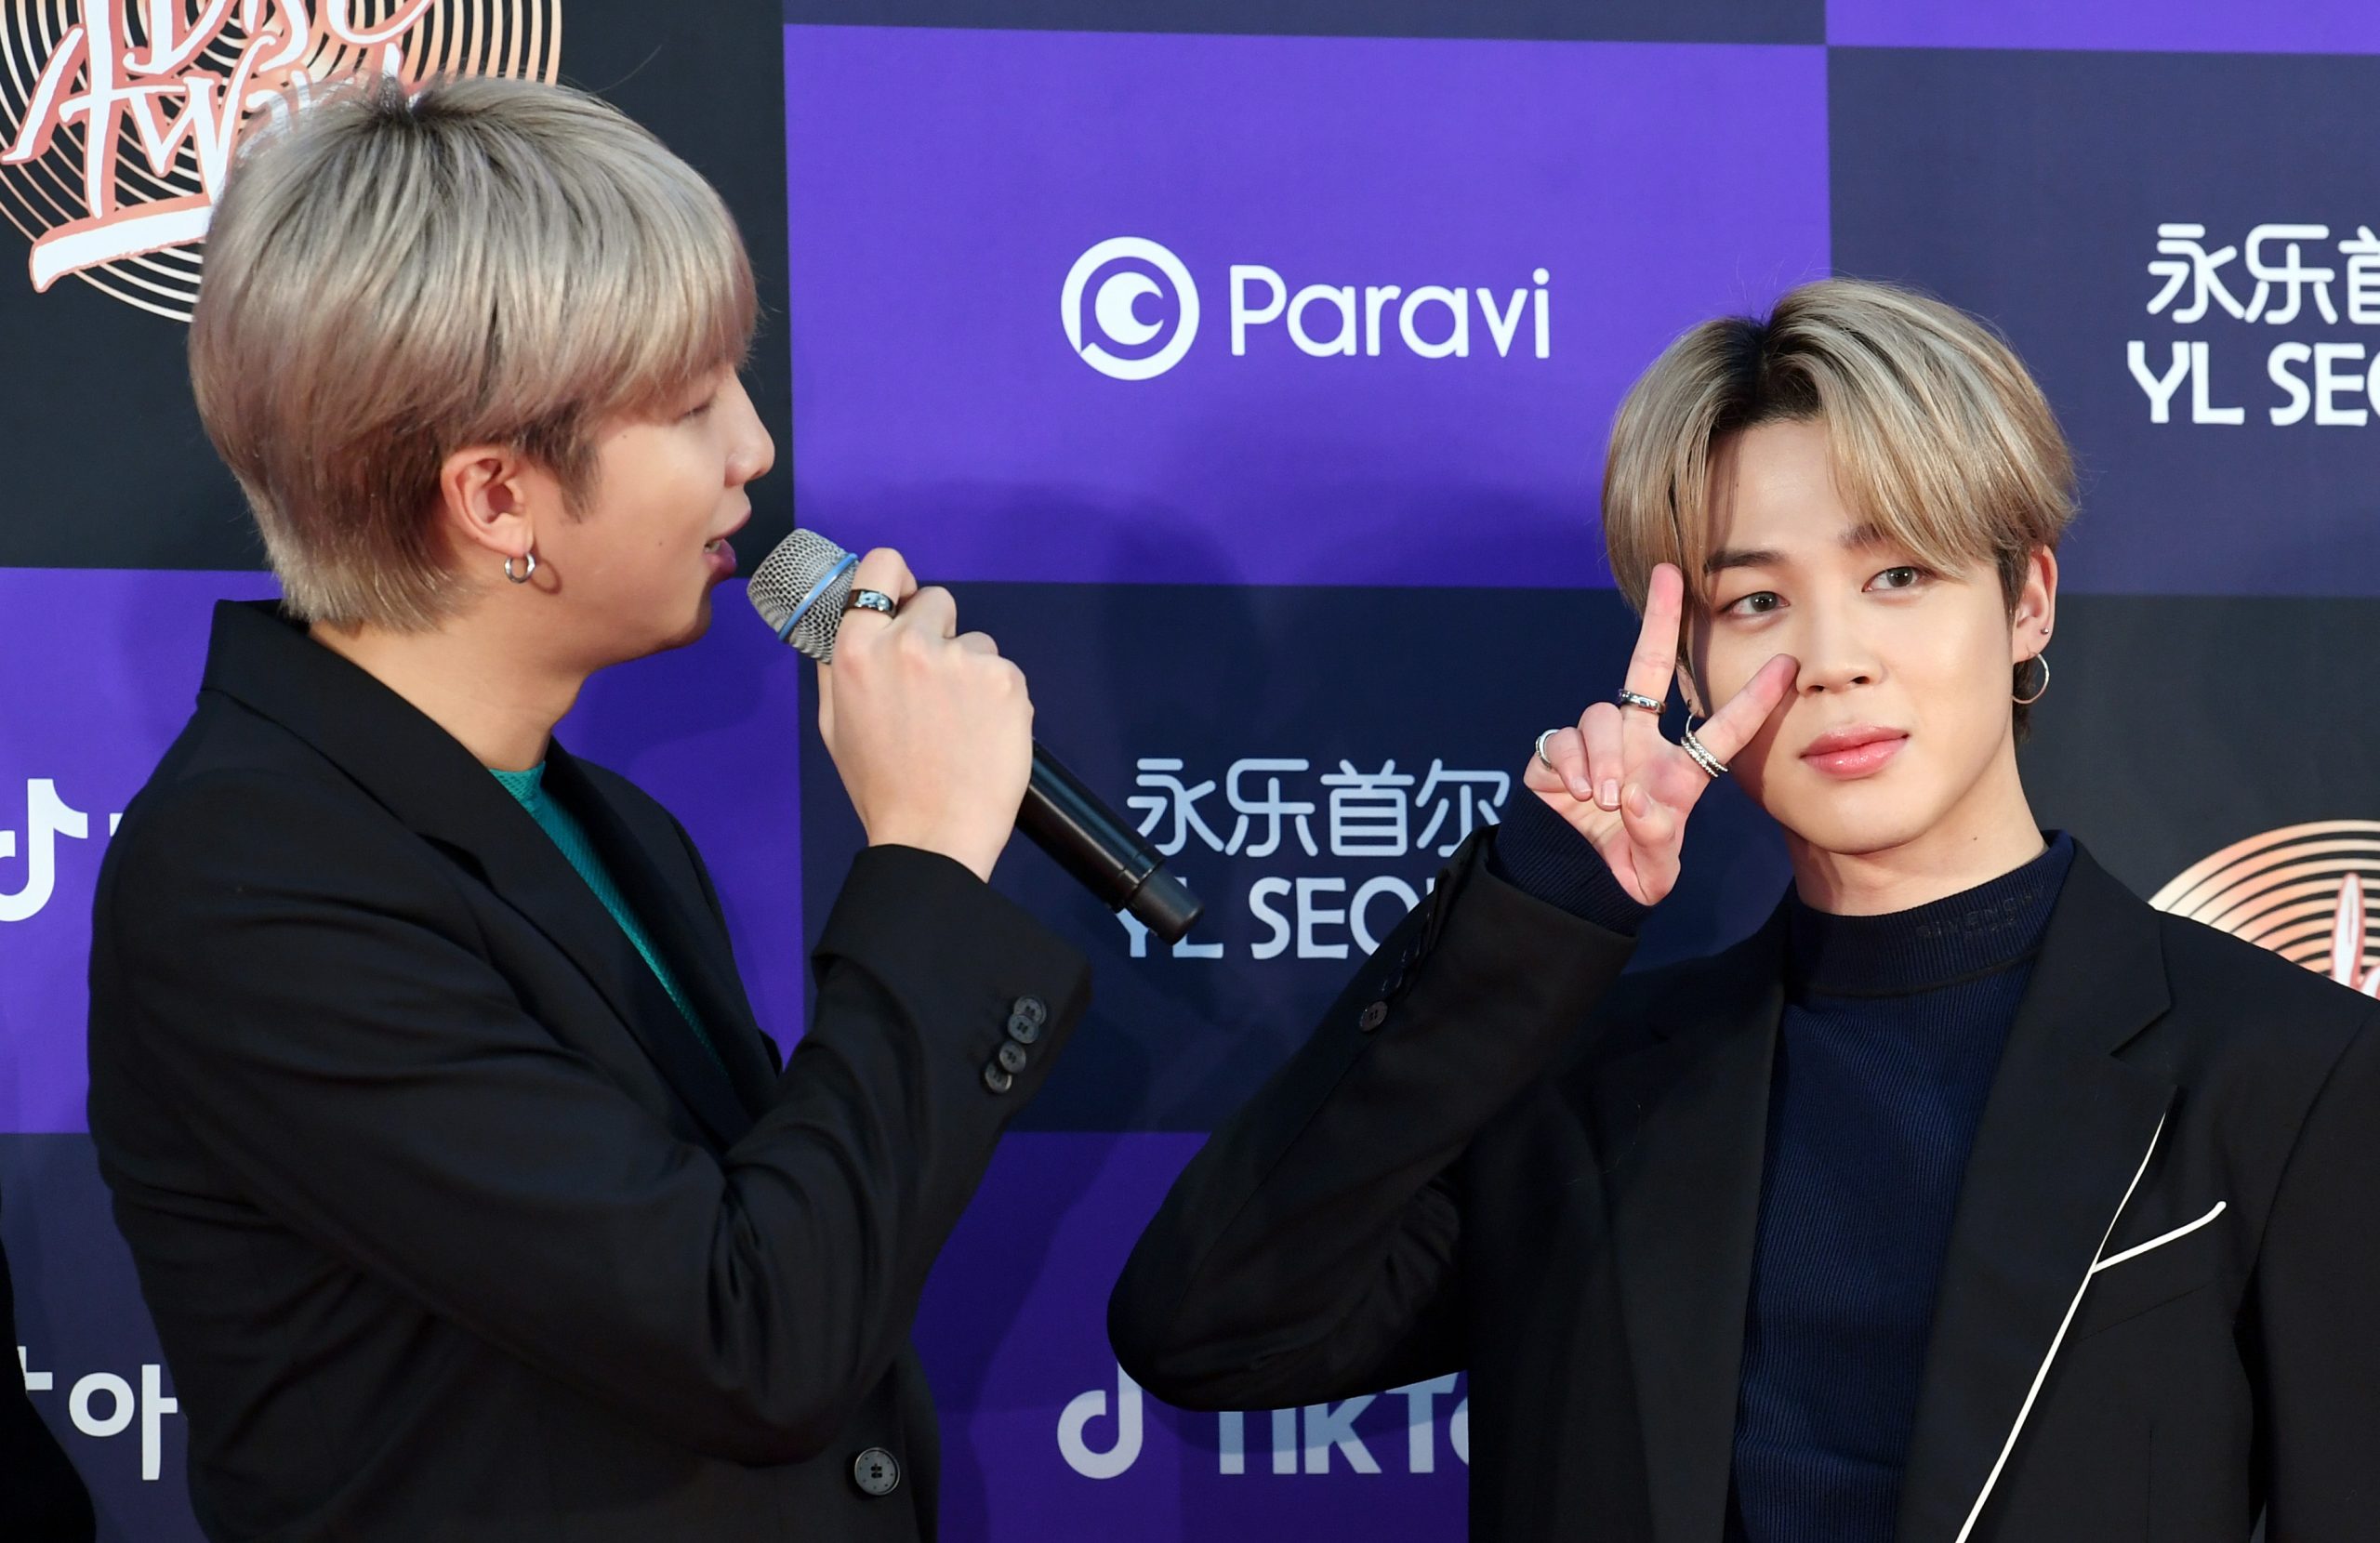 BTS's Jimin sells out the Louis Vuitton pullover he wore in an